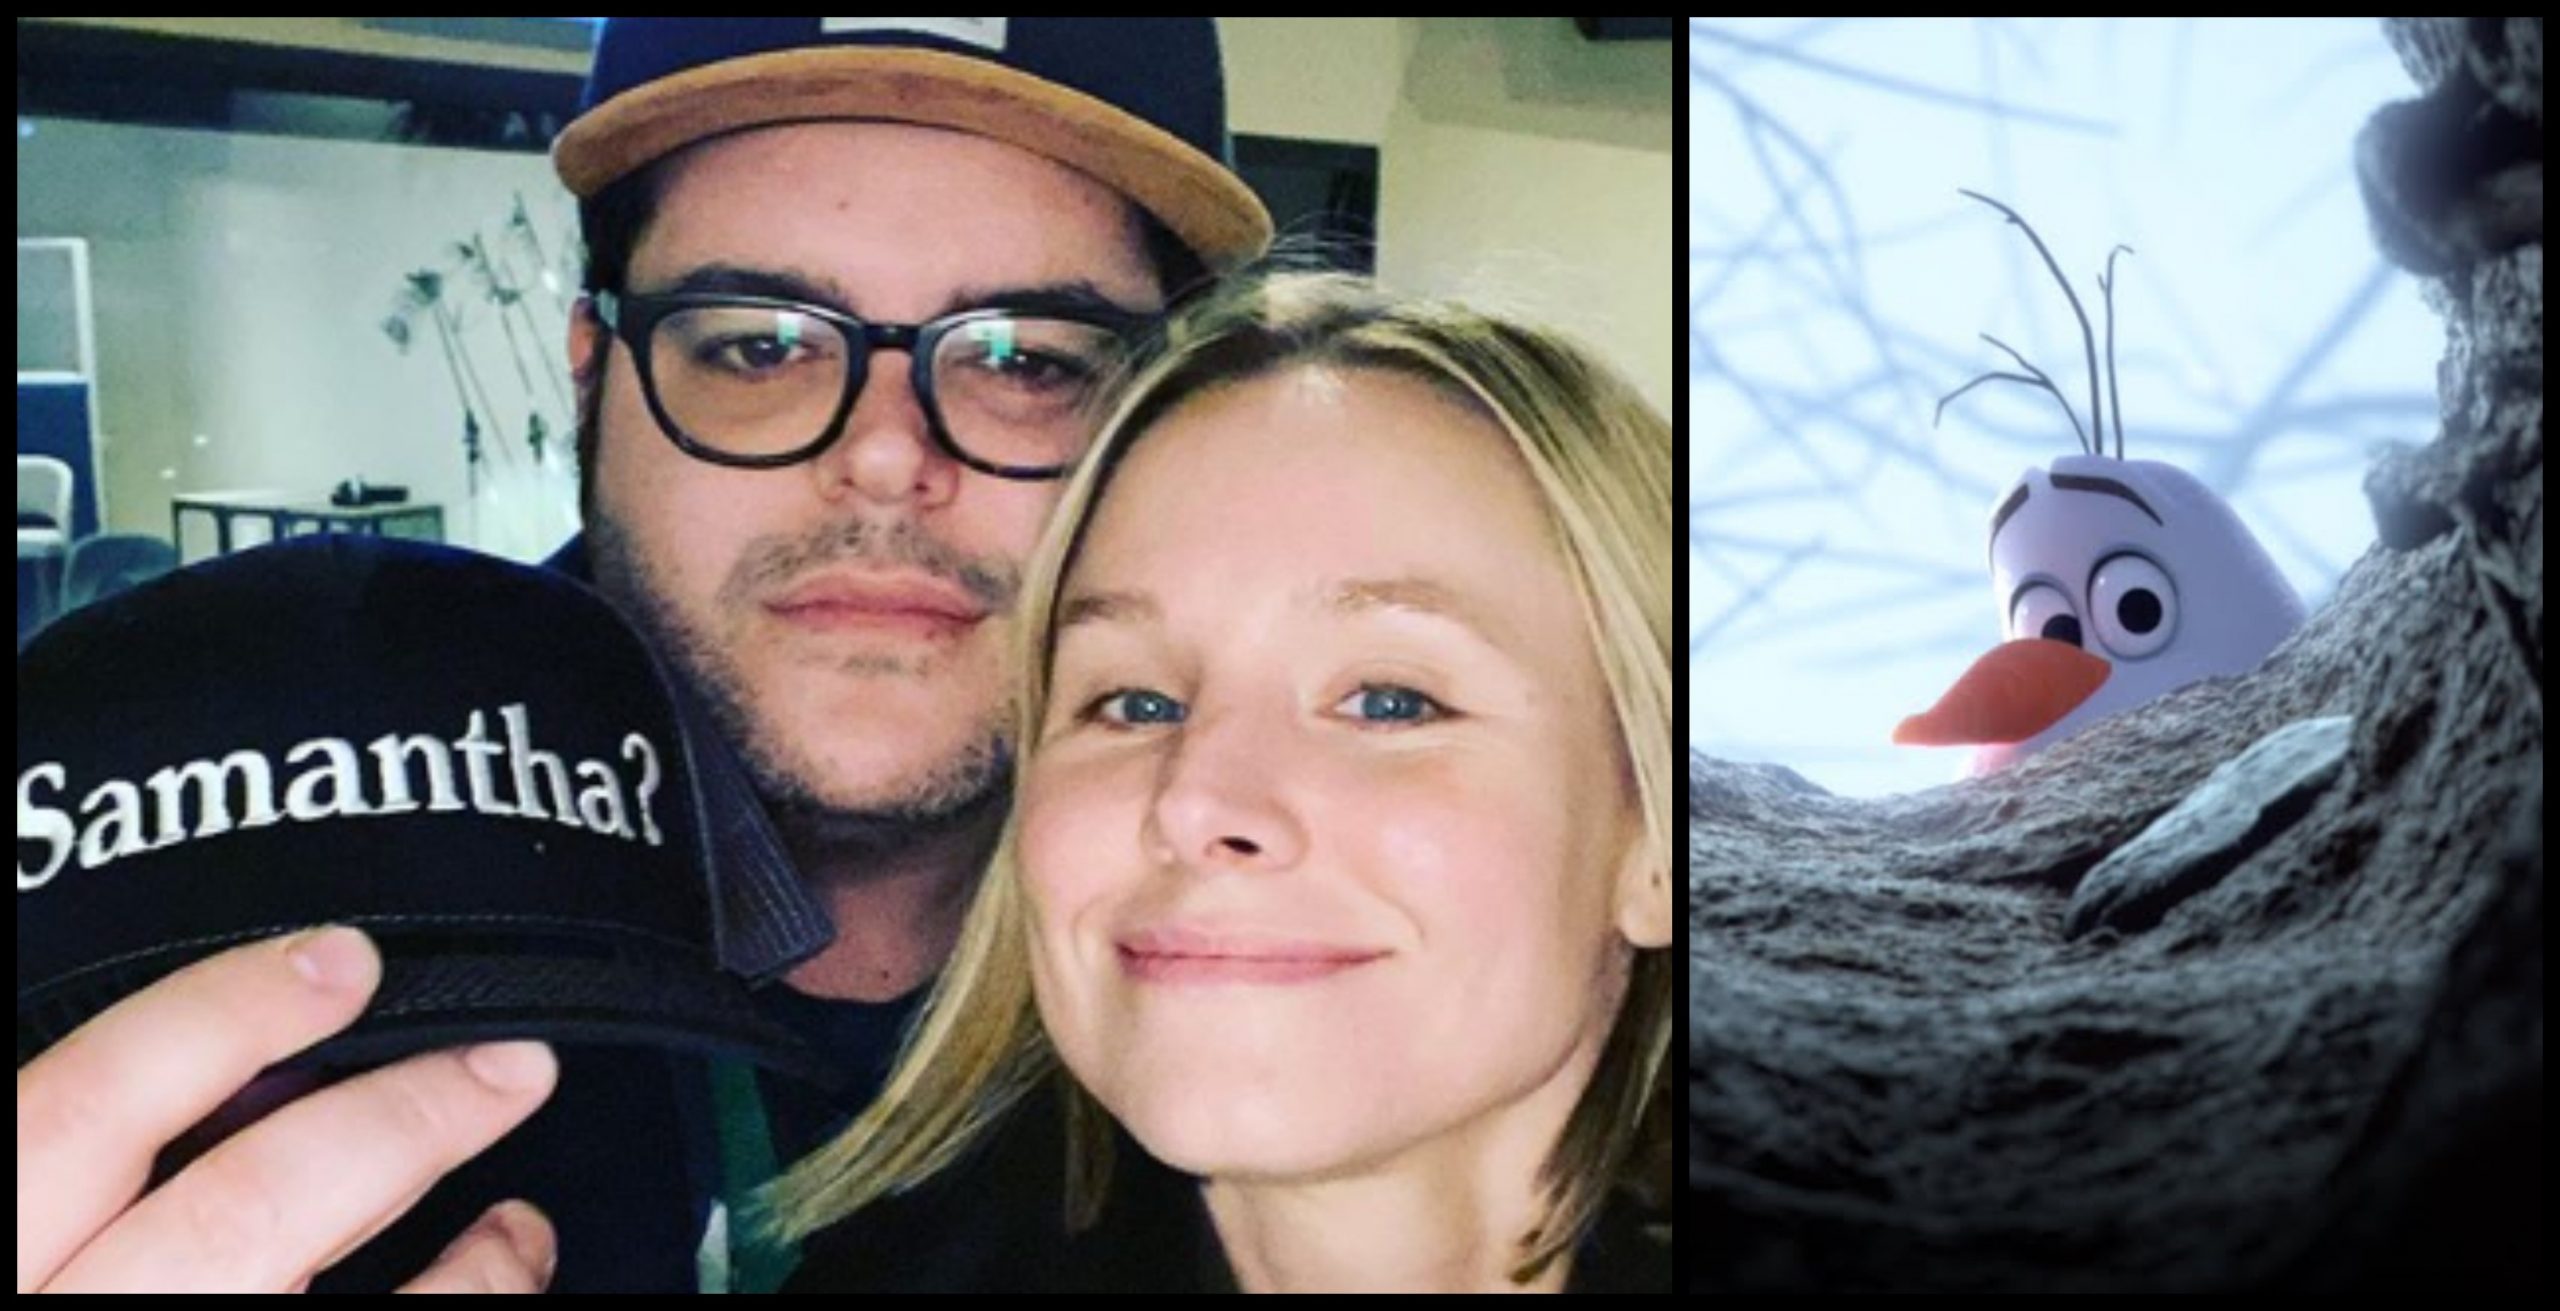 Josh Gad and Kristen Bell Create “Samantha?” Hats to Raise Money for Charity